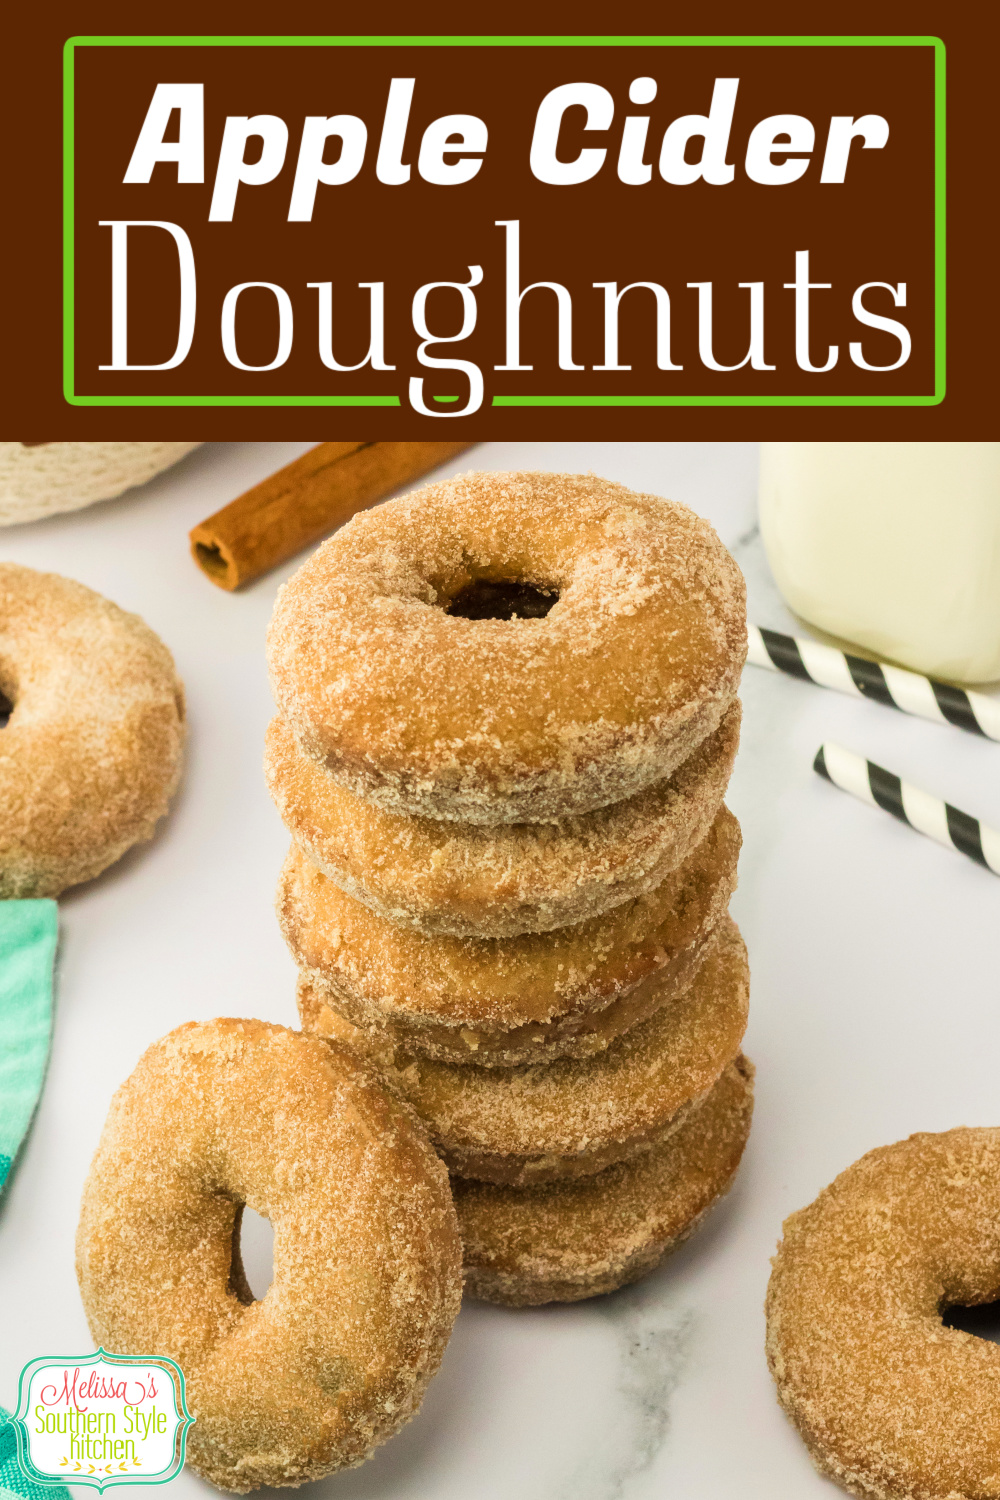 Serve these baked Apple Cider Doughnuts with a cup of coffee, tea or a tall glass of milk. #apples #applecider #doughnuts #appleciderdoughnuts #donuts #donutrecipes via @melissasssk